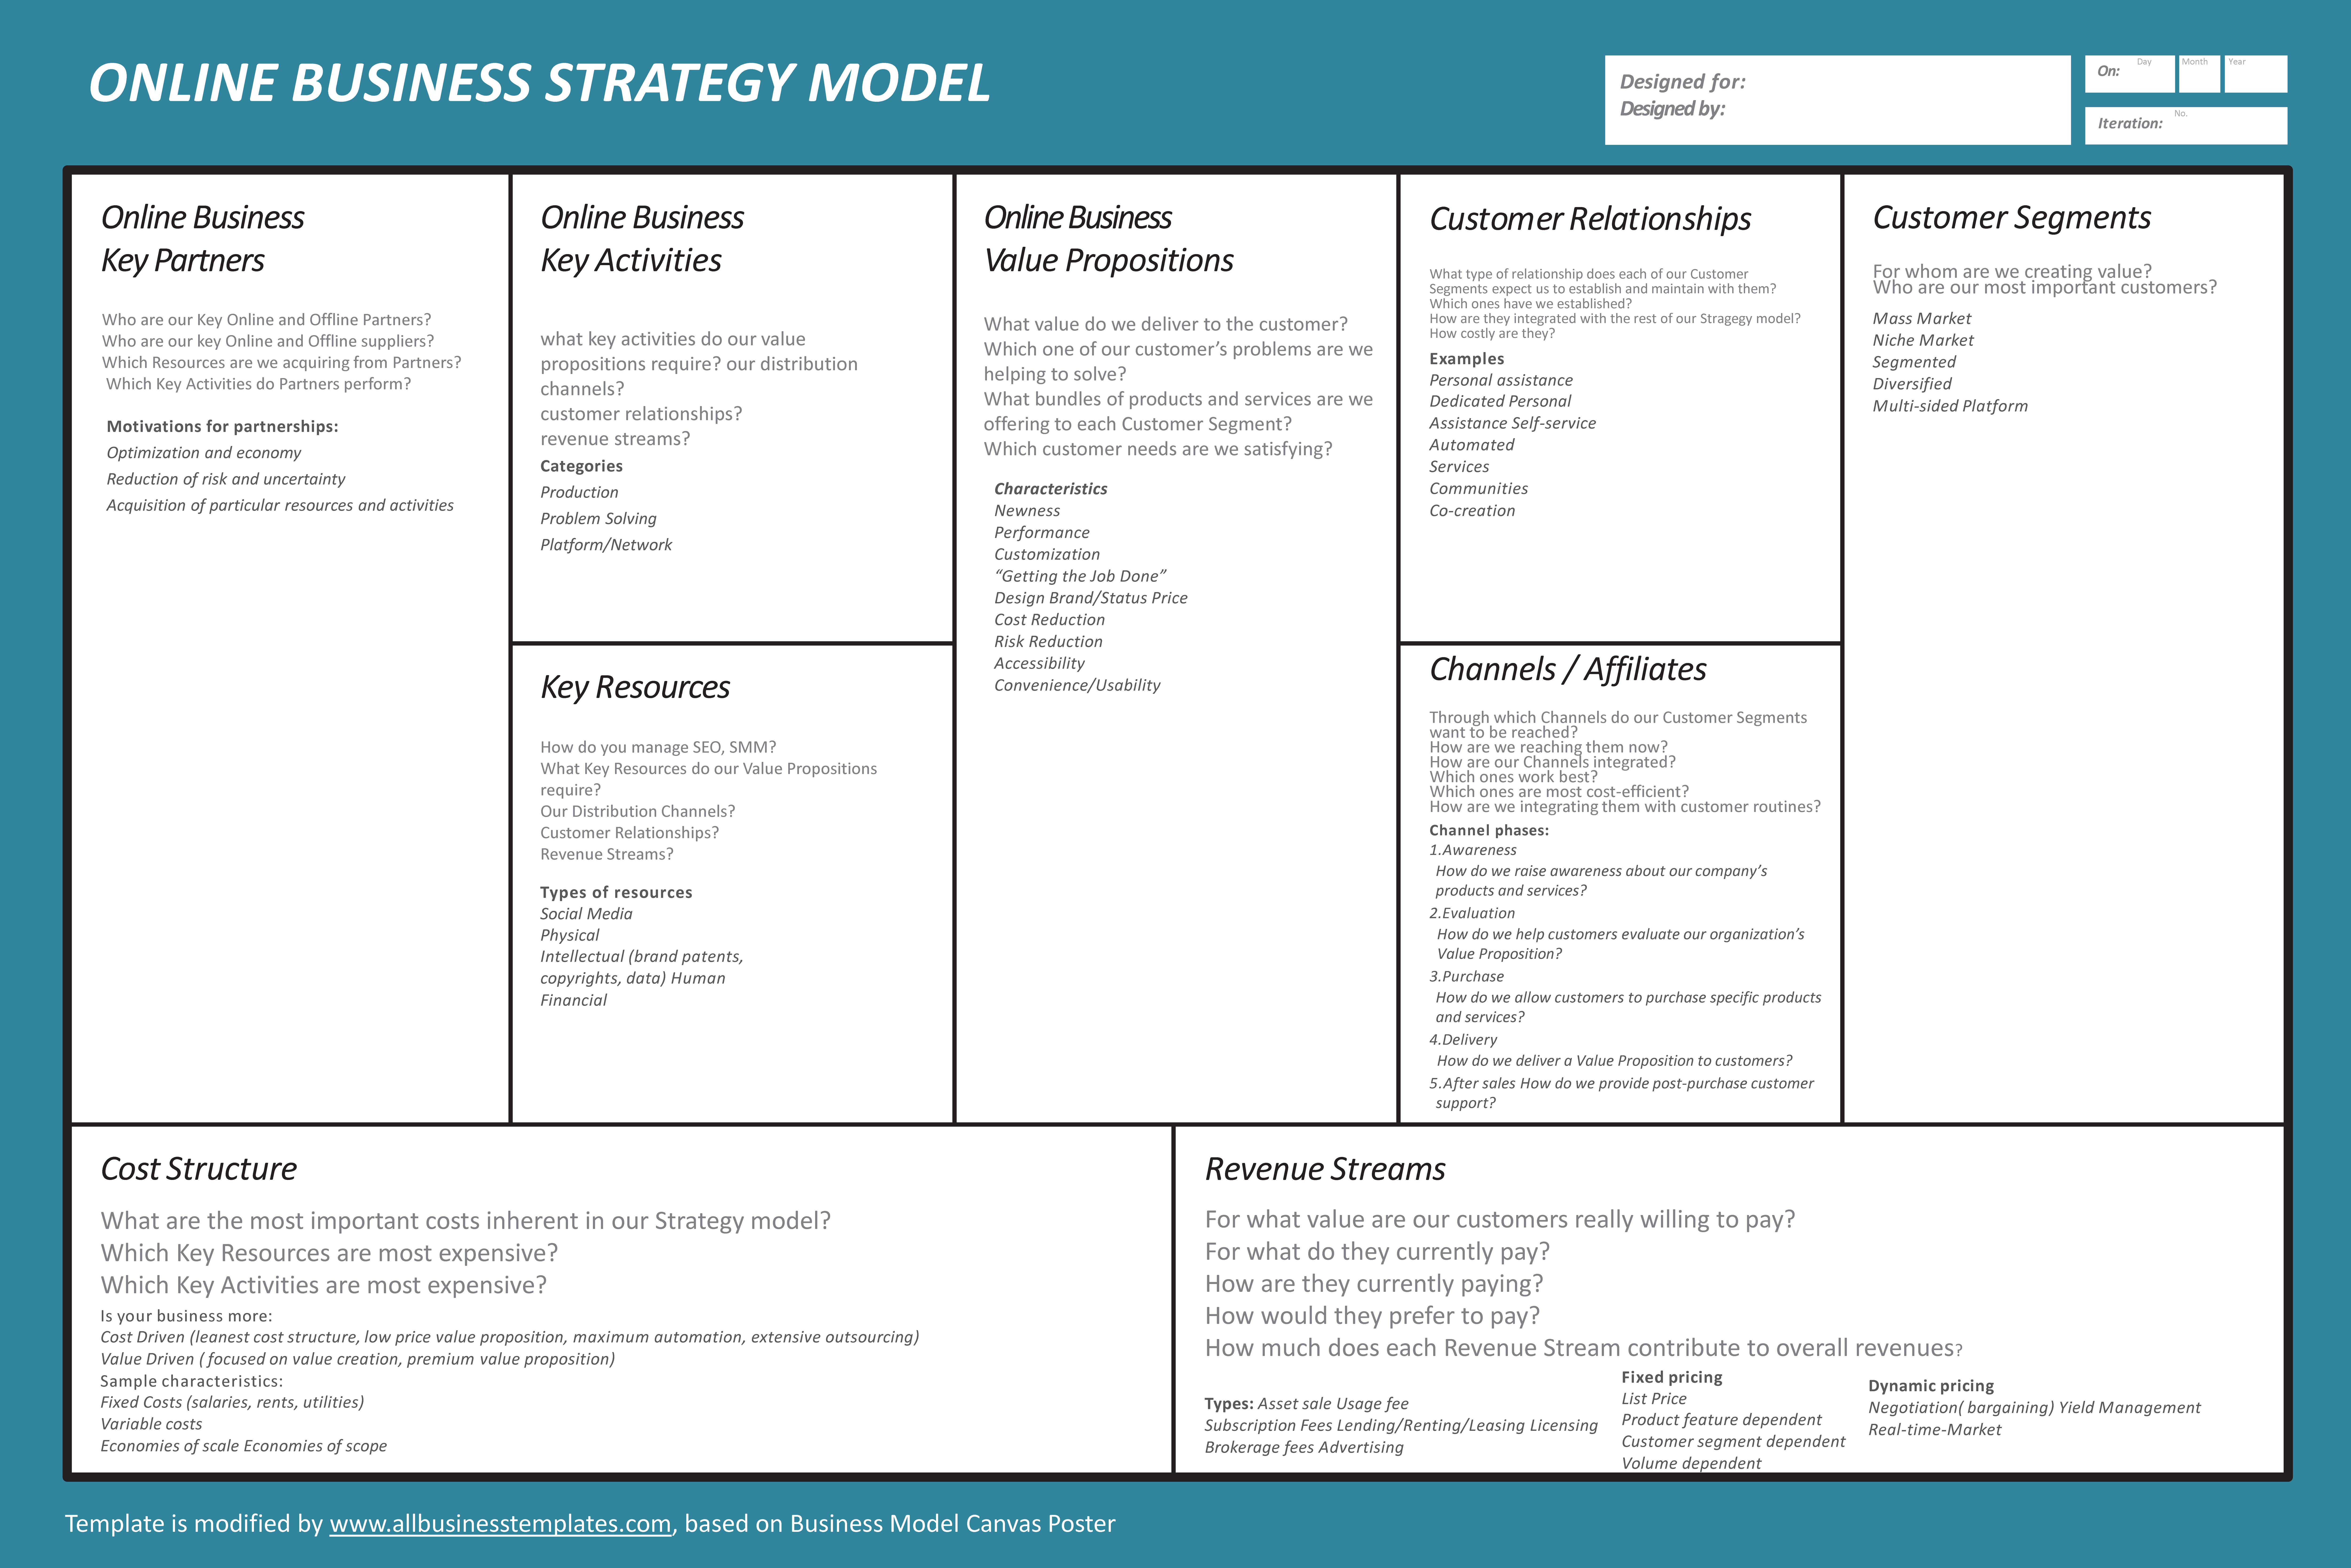 Online Business Strategy Model main image